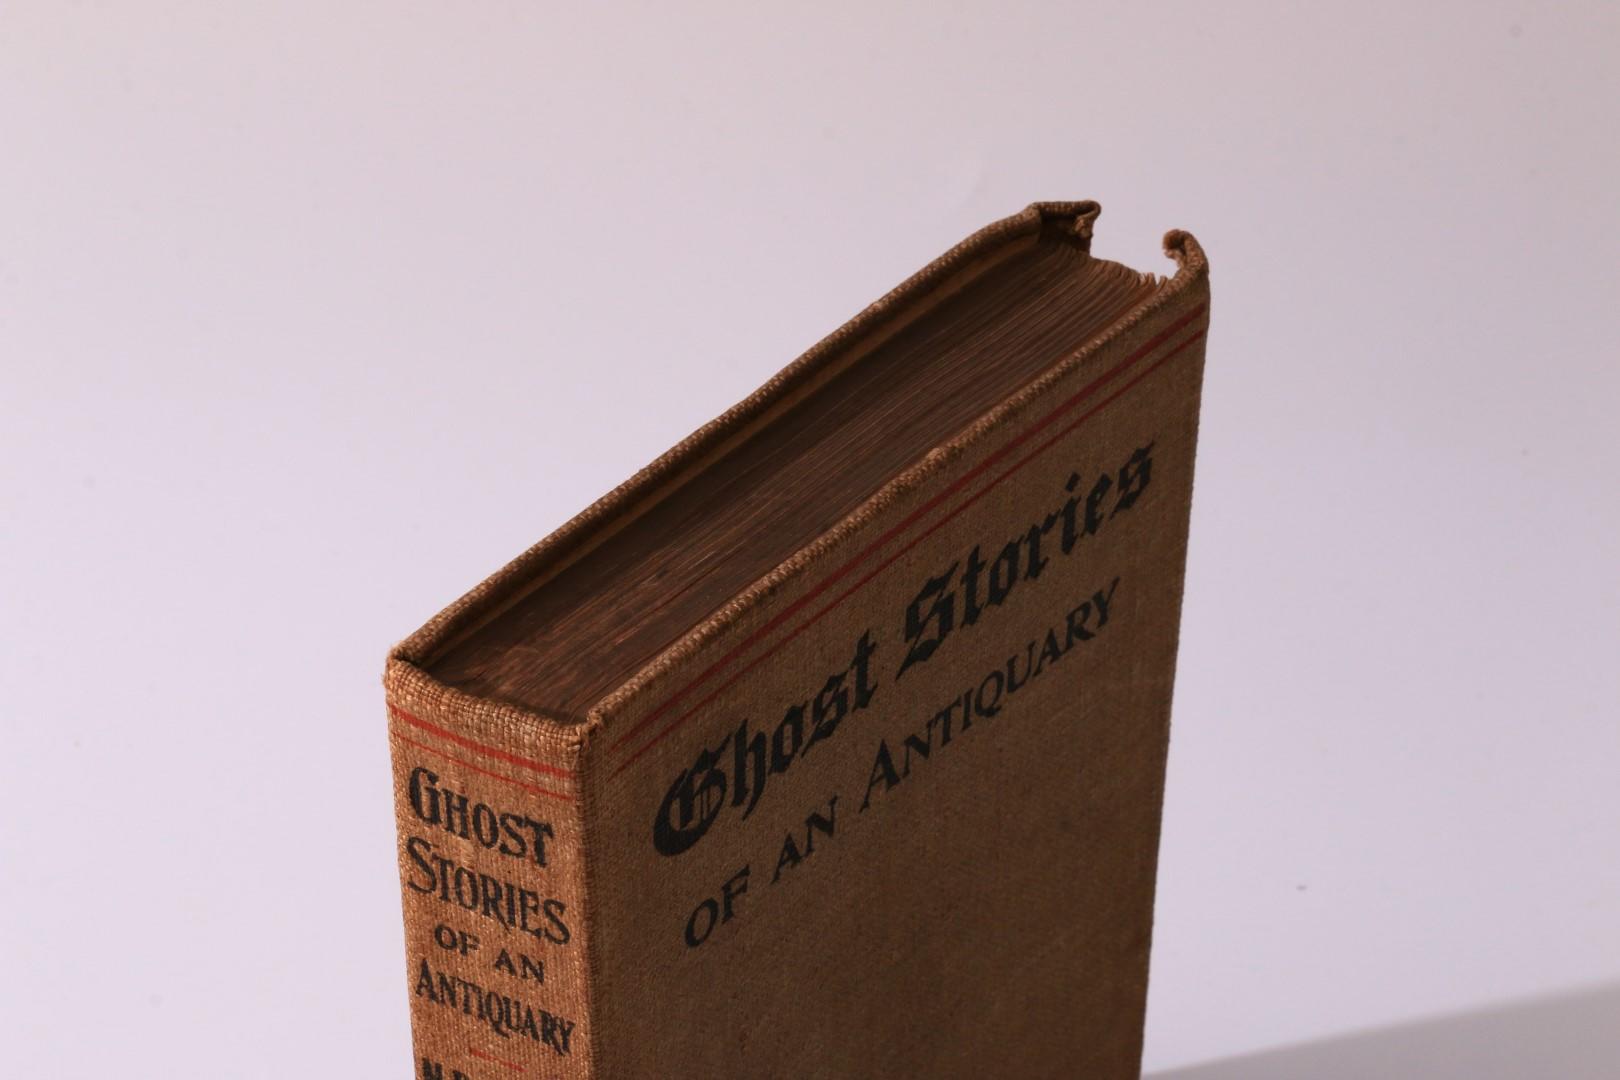 M.R. James - Ghost Stories of an Antiquary - Edward Arnold, 1904, First Edition.